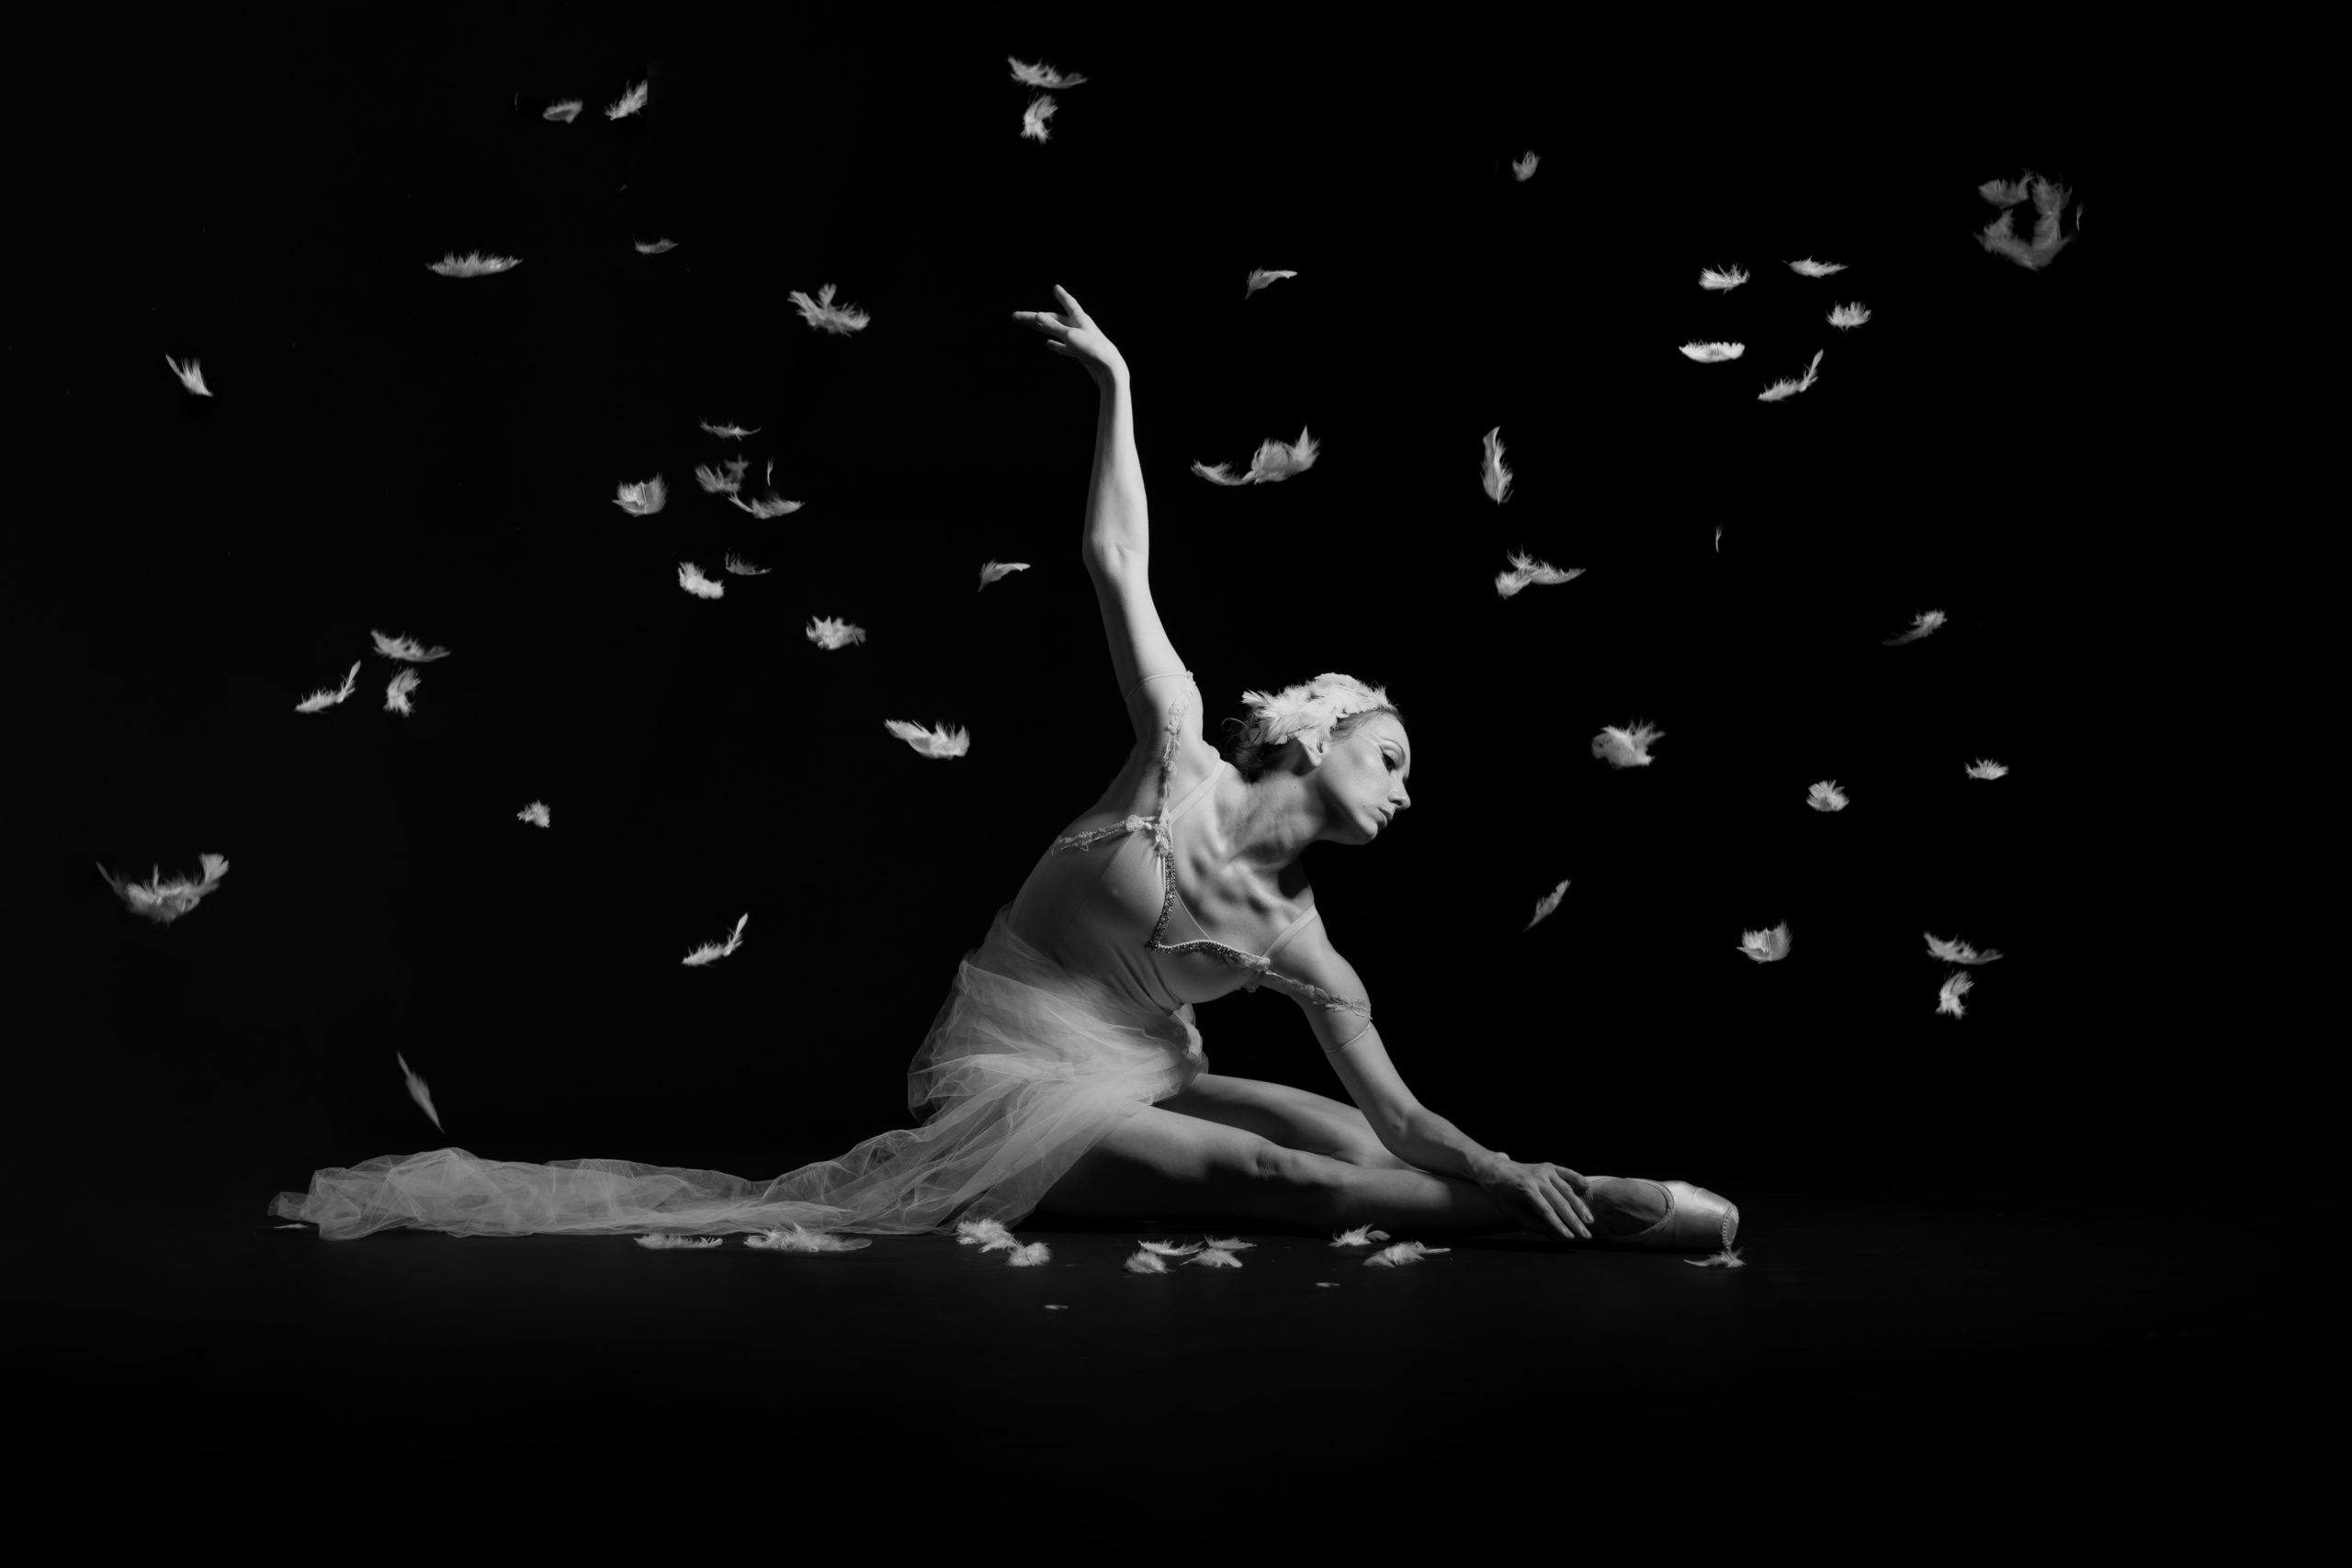 In this black and white photo, Megan Jacobs sits on the ground with her right leg extended in front of her and her left leg tucked. She leans over her legs, touching her left hand to her right foot, and reaches her right arm back behind her. She wears a feathered headpiece, pointe shoes, a light-colored leotard and a swath of white tulle wrapped around her waist, which trails out onto the ground. Feathers rain down softly from the ceiling.